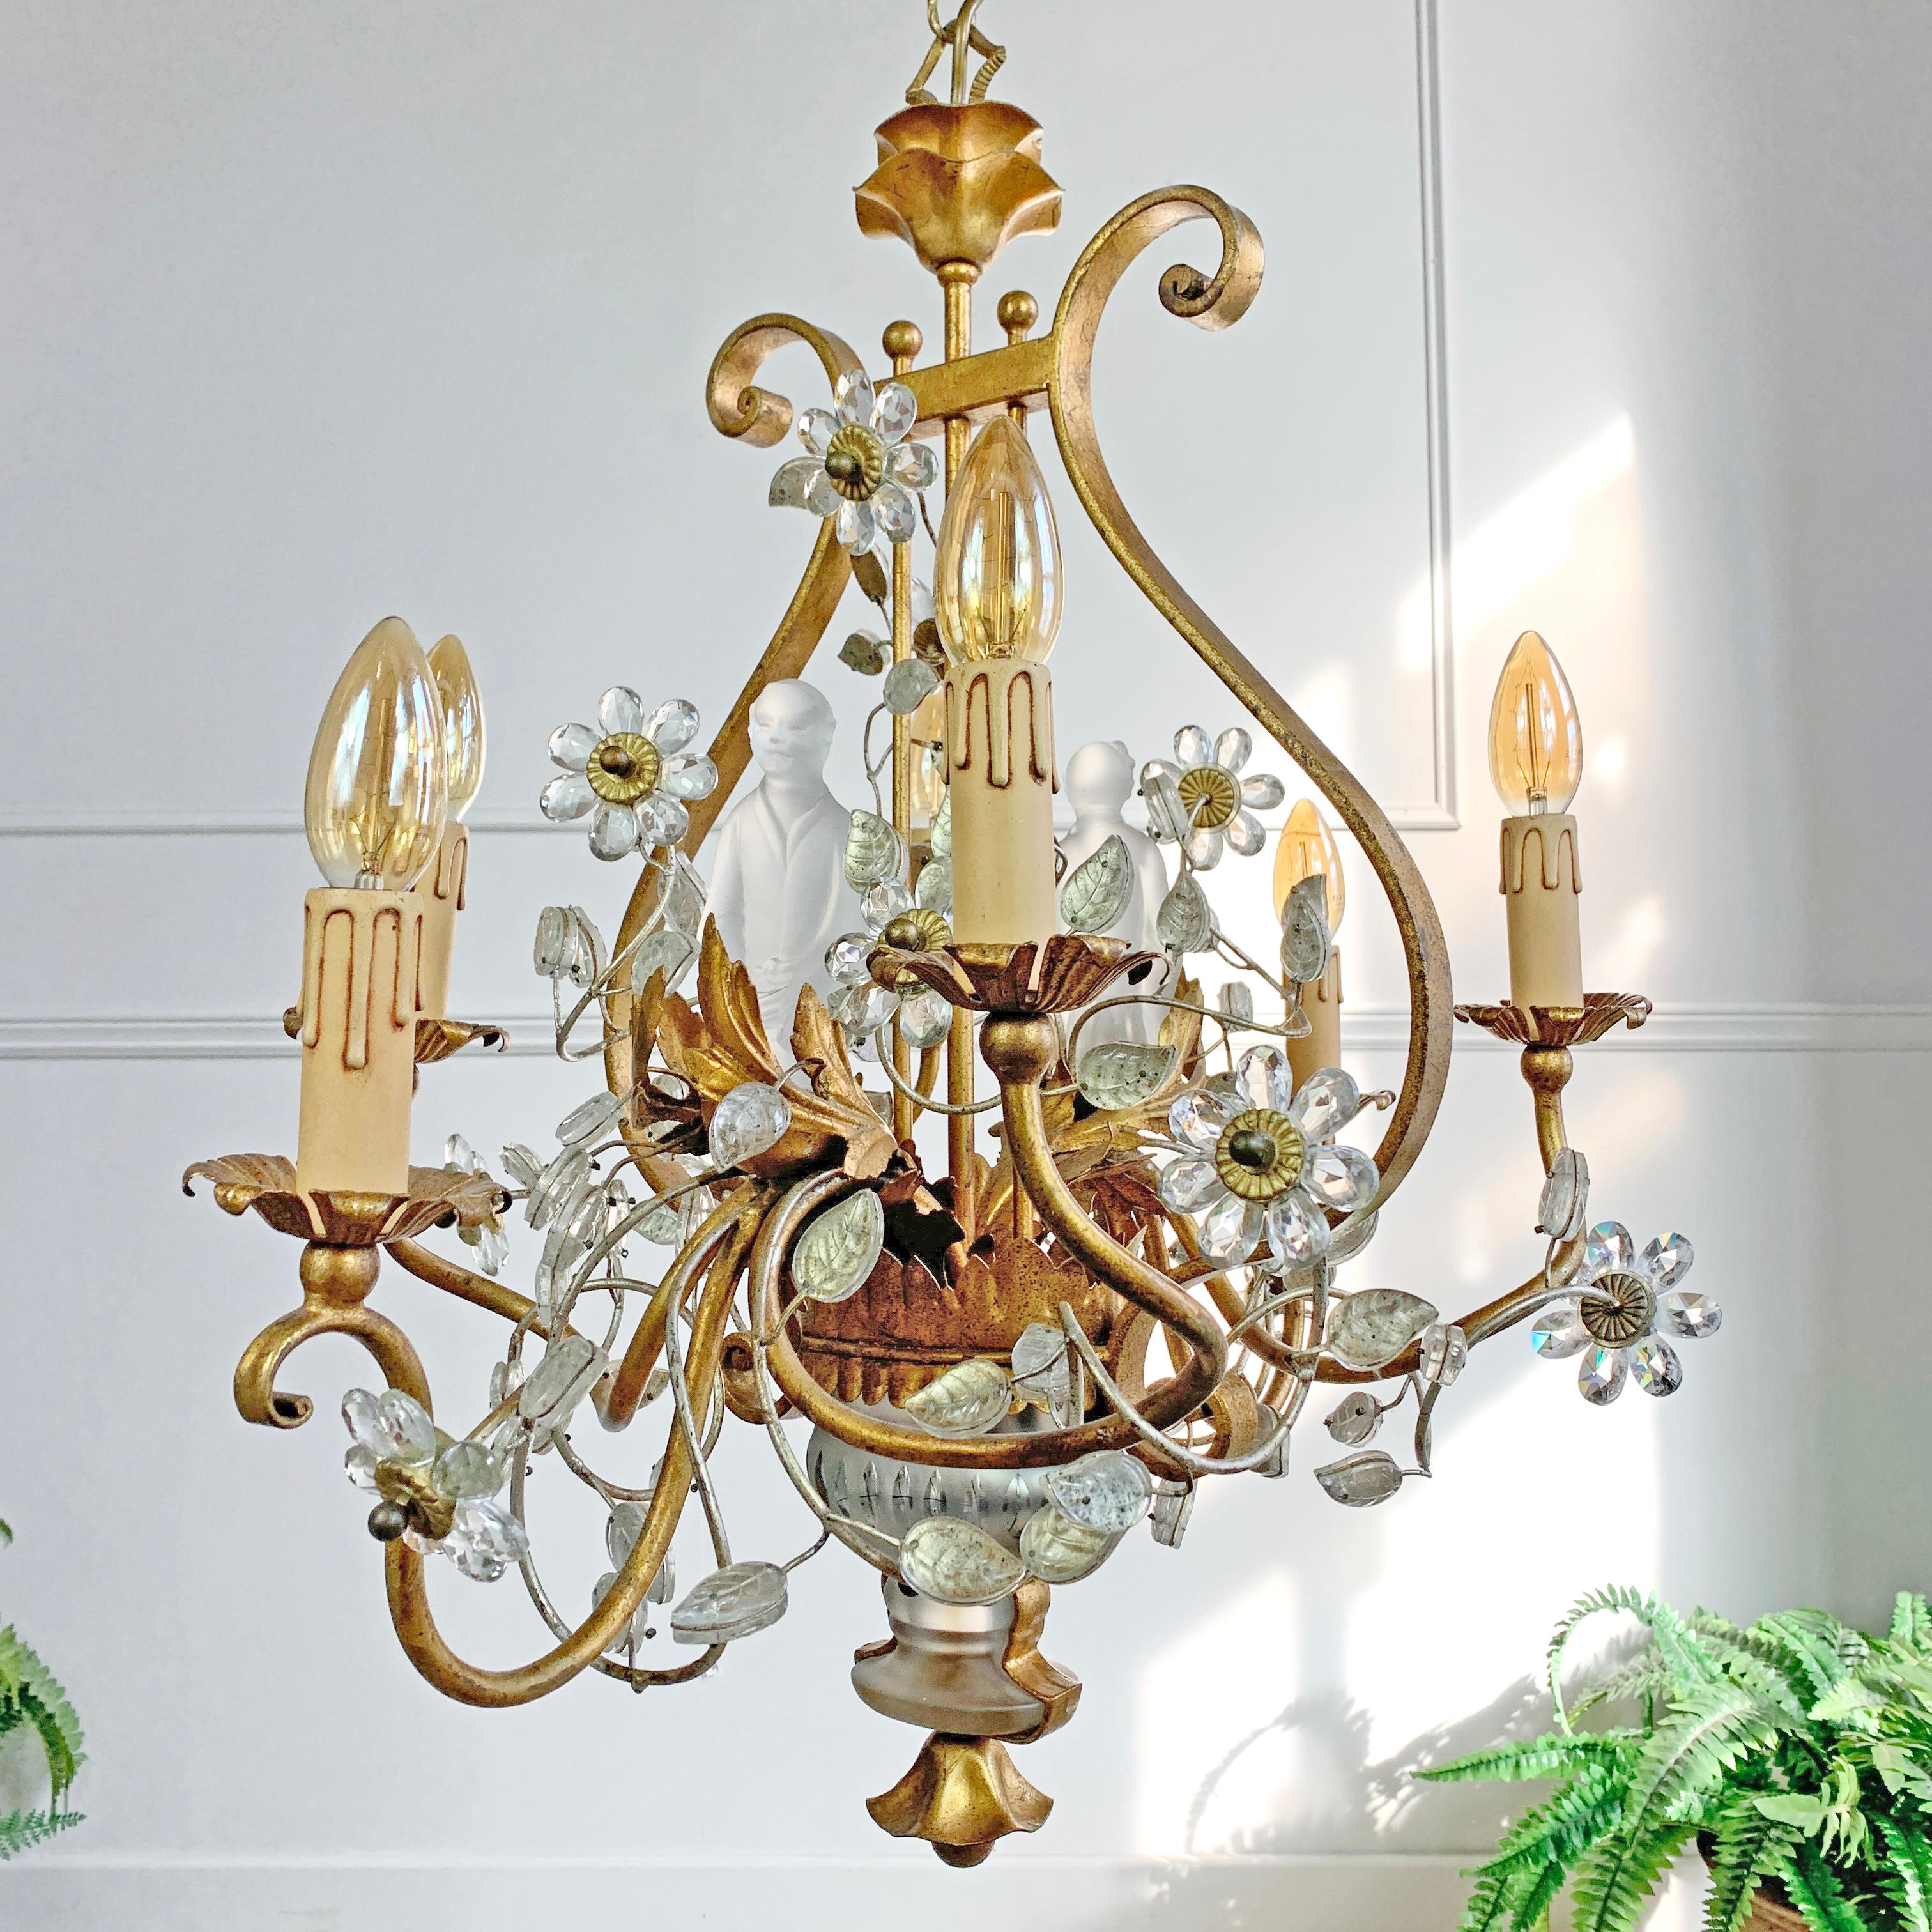 An exceptionally rare Banci Firenze chandelier, gilt iron frame surmounted with crystal leaves and flowers that sit on spiraling golden gilt arms, to the base sit two solid crystal jardinieres, whilst within the body of the light there are a pair of